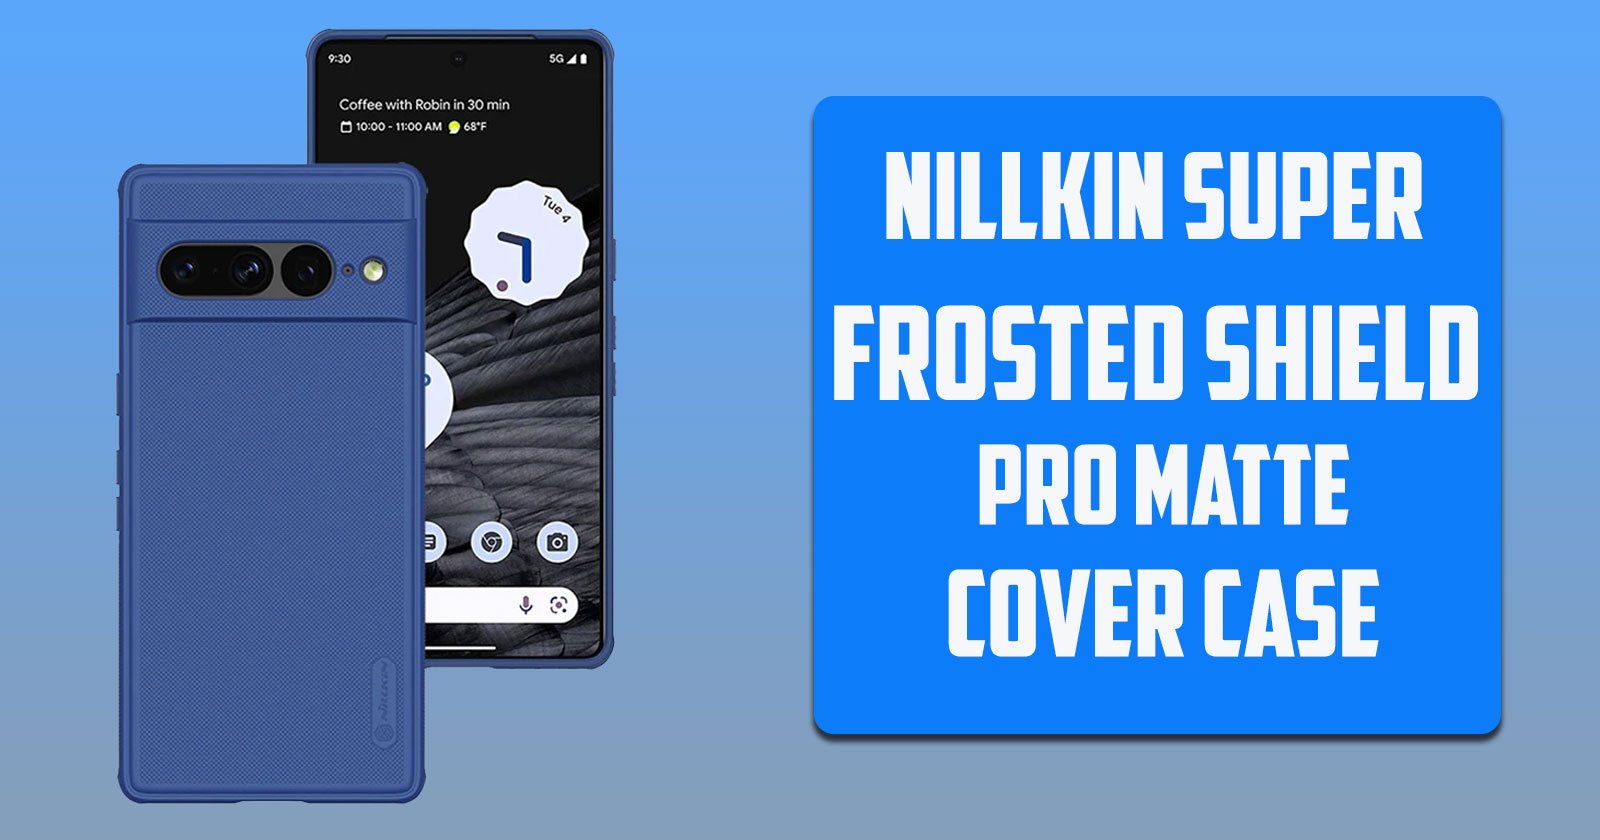 Nillkin Super Frosted Shield Pro Matte Cover Case for Google Pixel 7 Pro